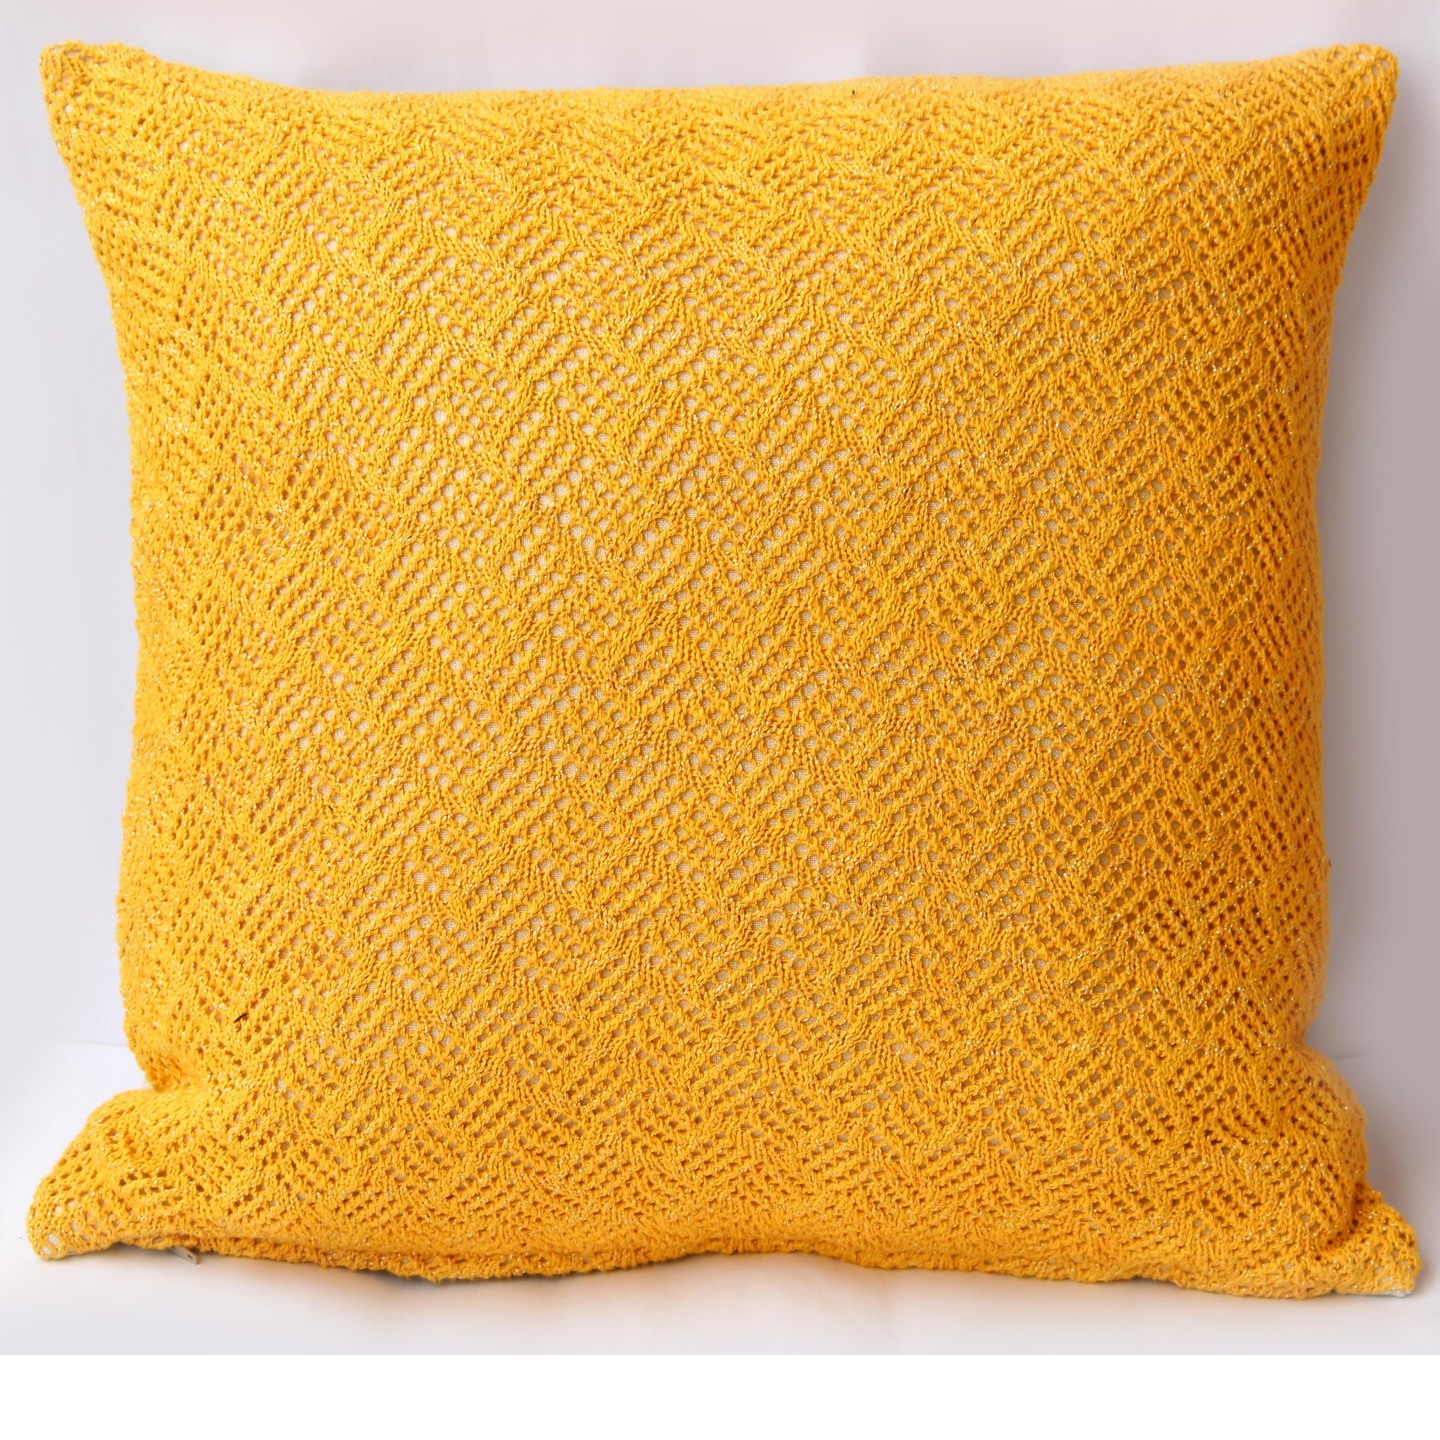 Yellow Cotton Lurex Knitted Cushion cover (Set of 2)